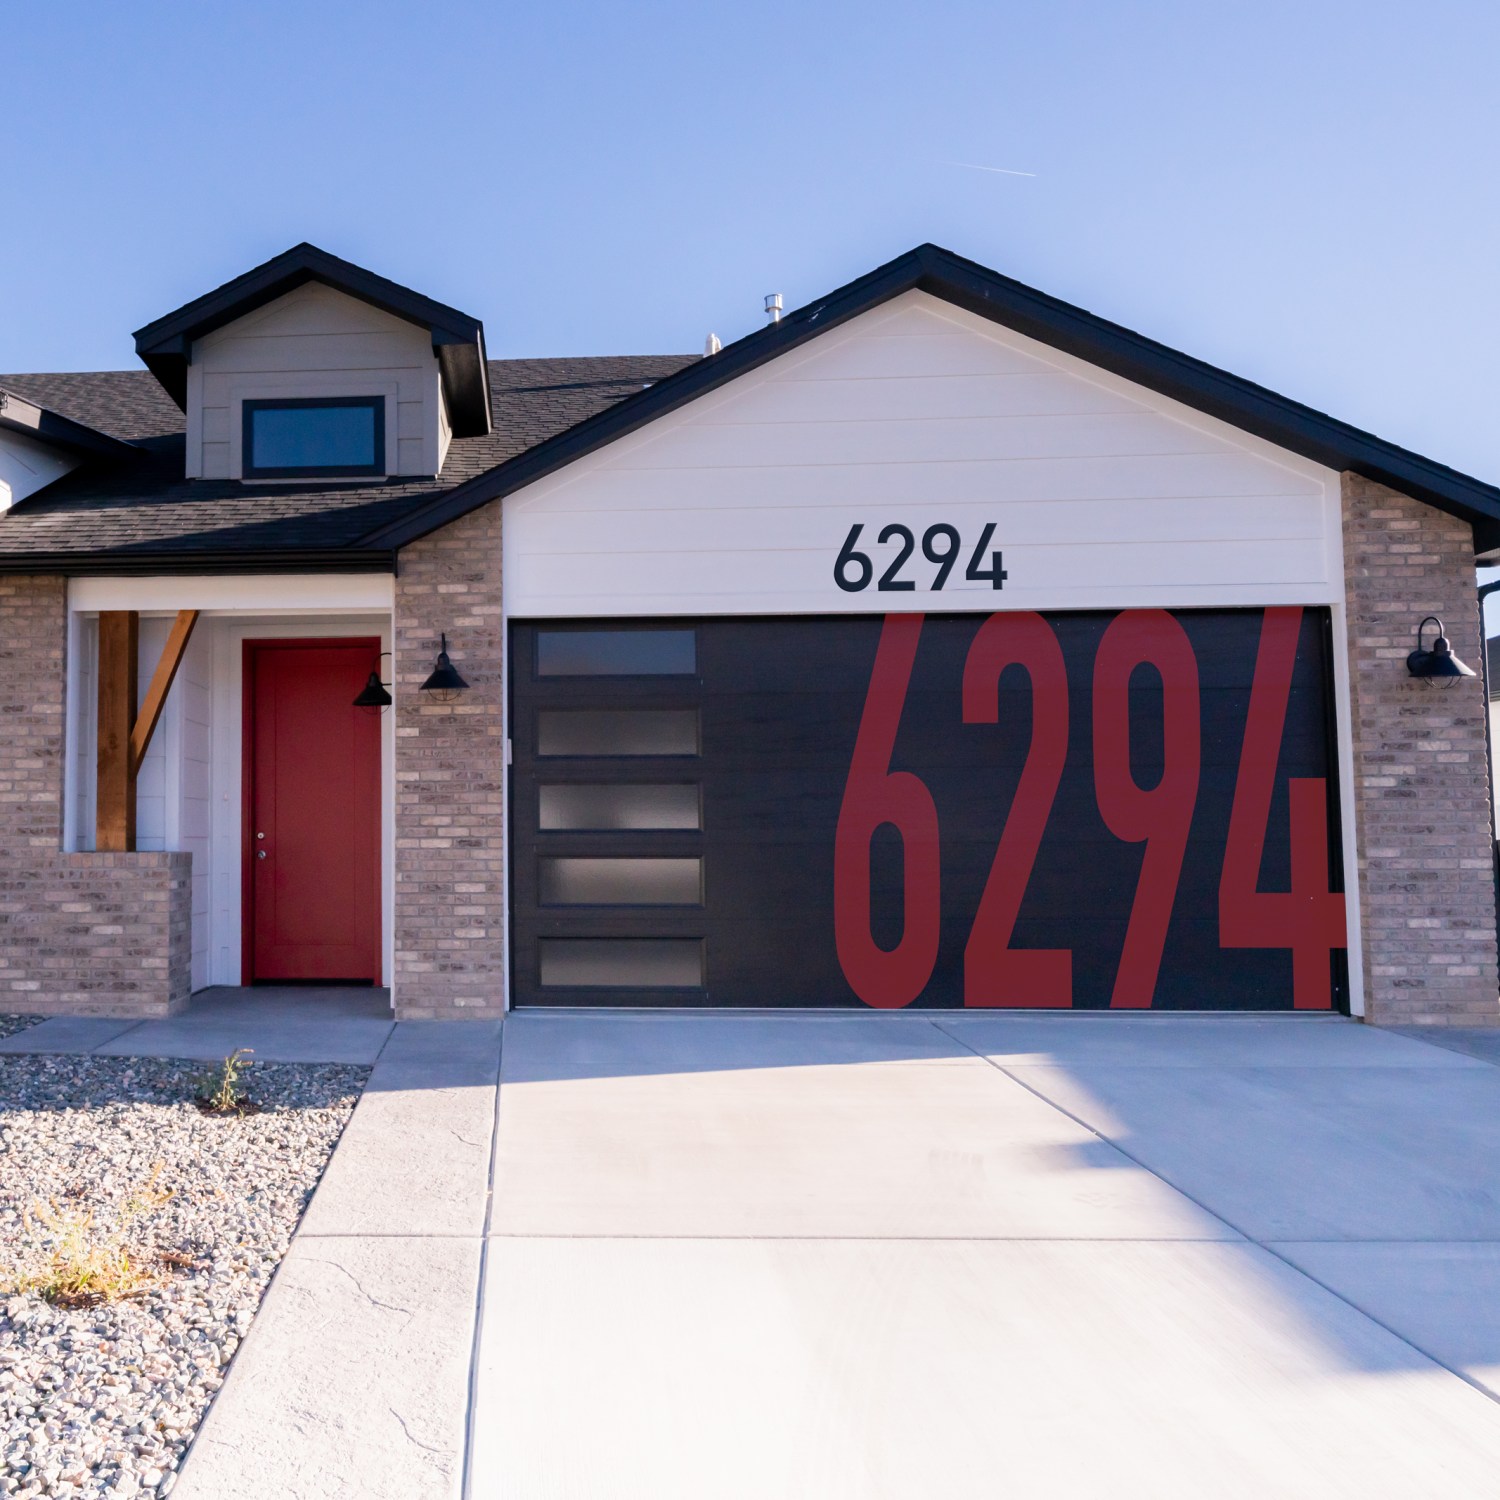 front exterior trendy home with brick and white siding has large red house numbers painted on black garage door